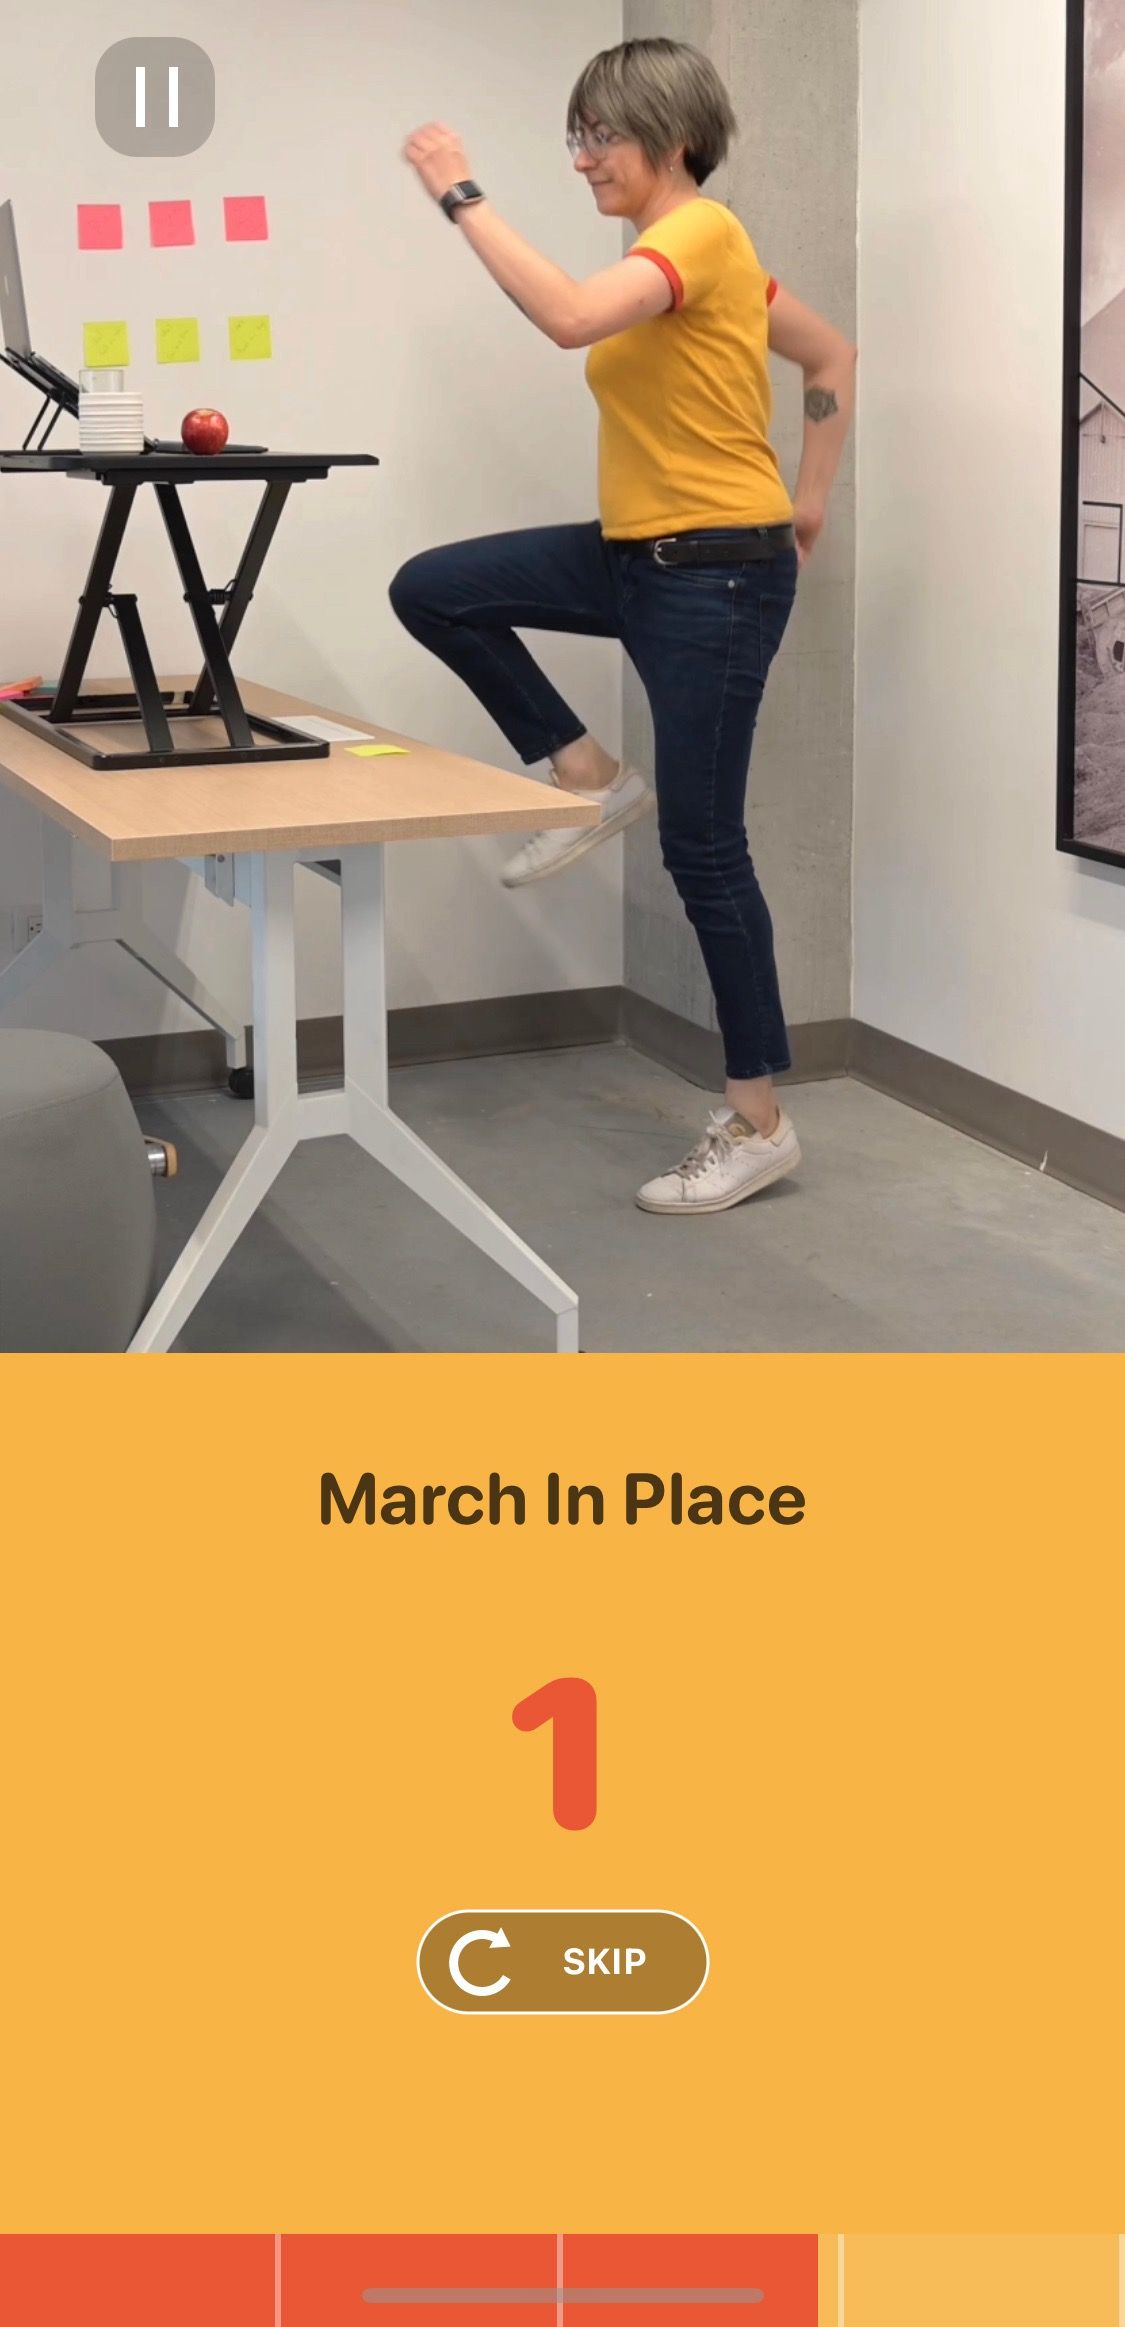 Screenshot of Wakeout app showing the march in place exercise screen